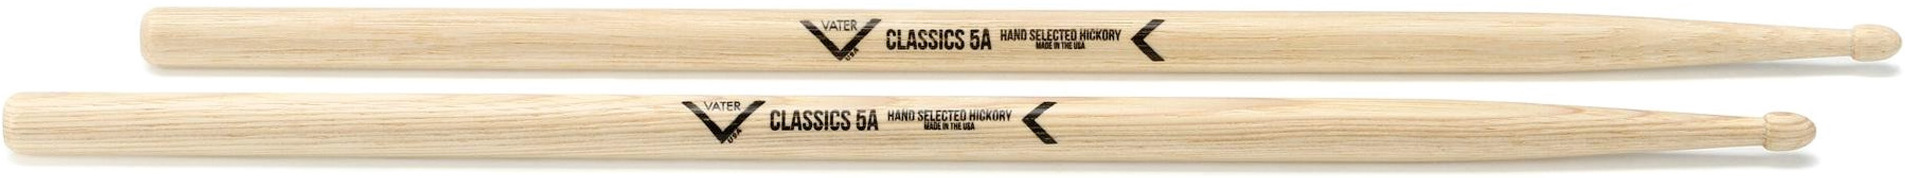 Vater Hickory Classics 5a - Stok - Main picture